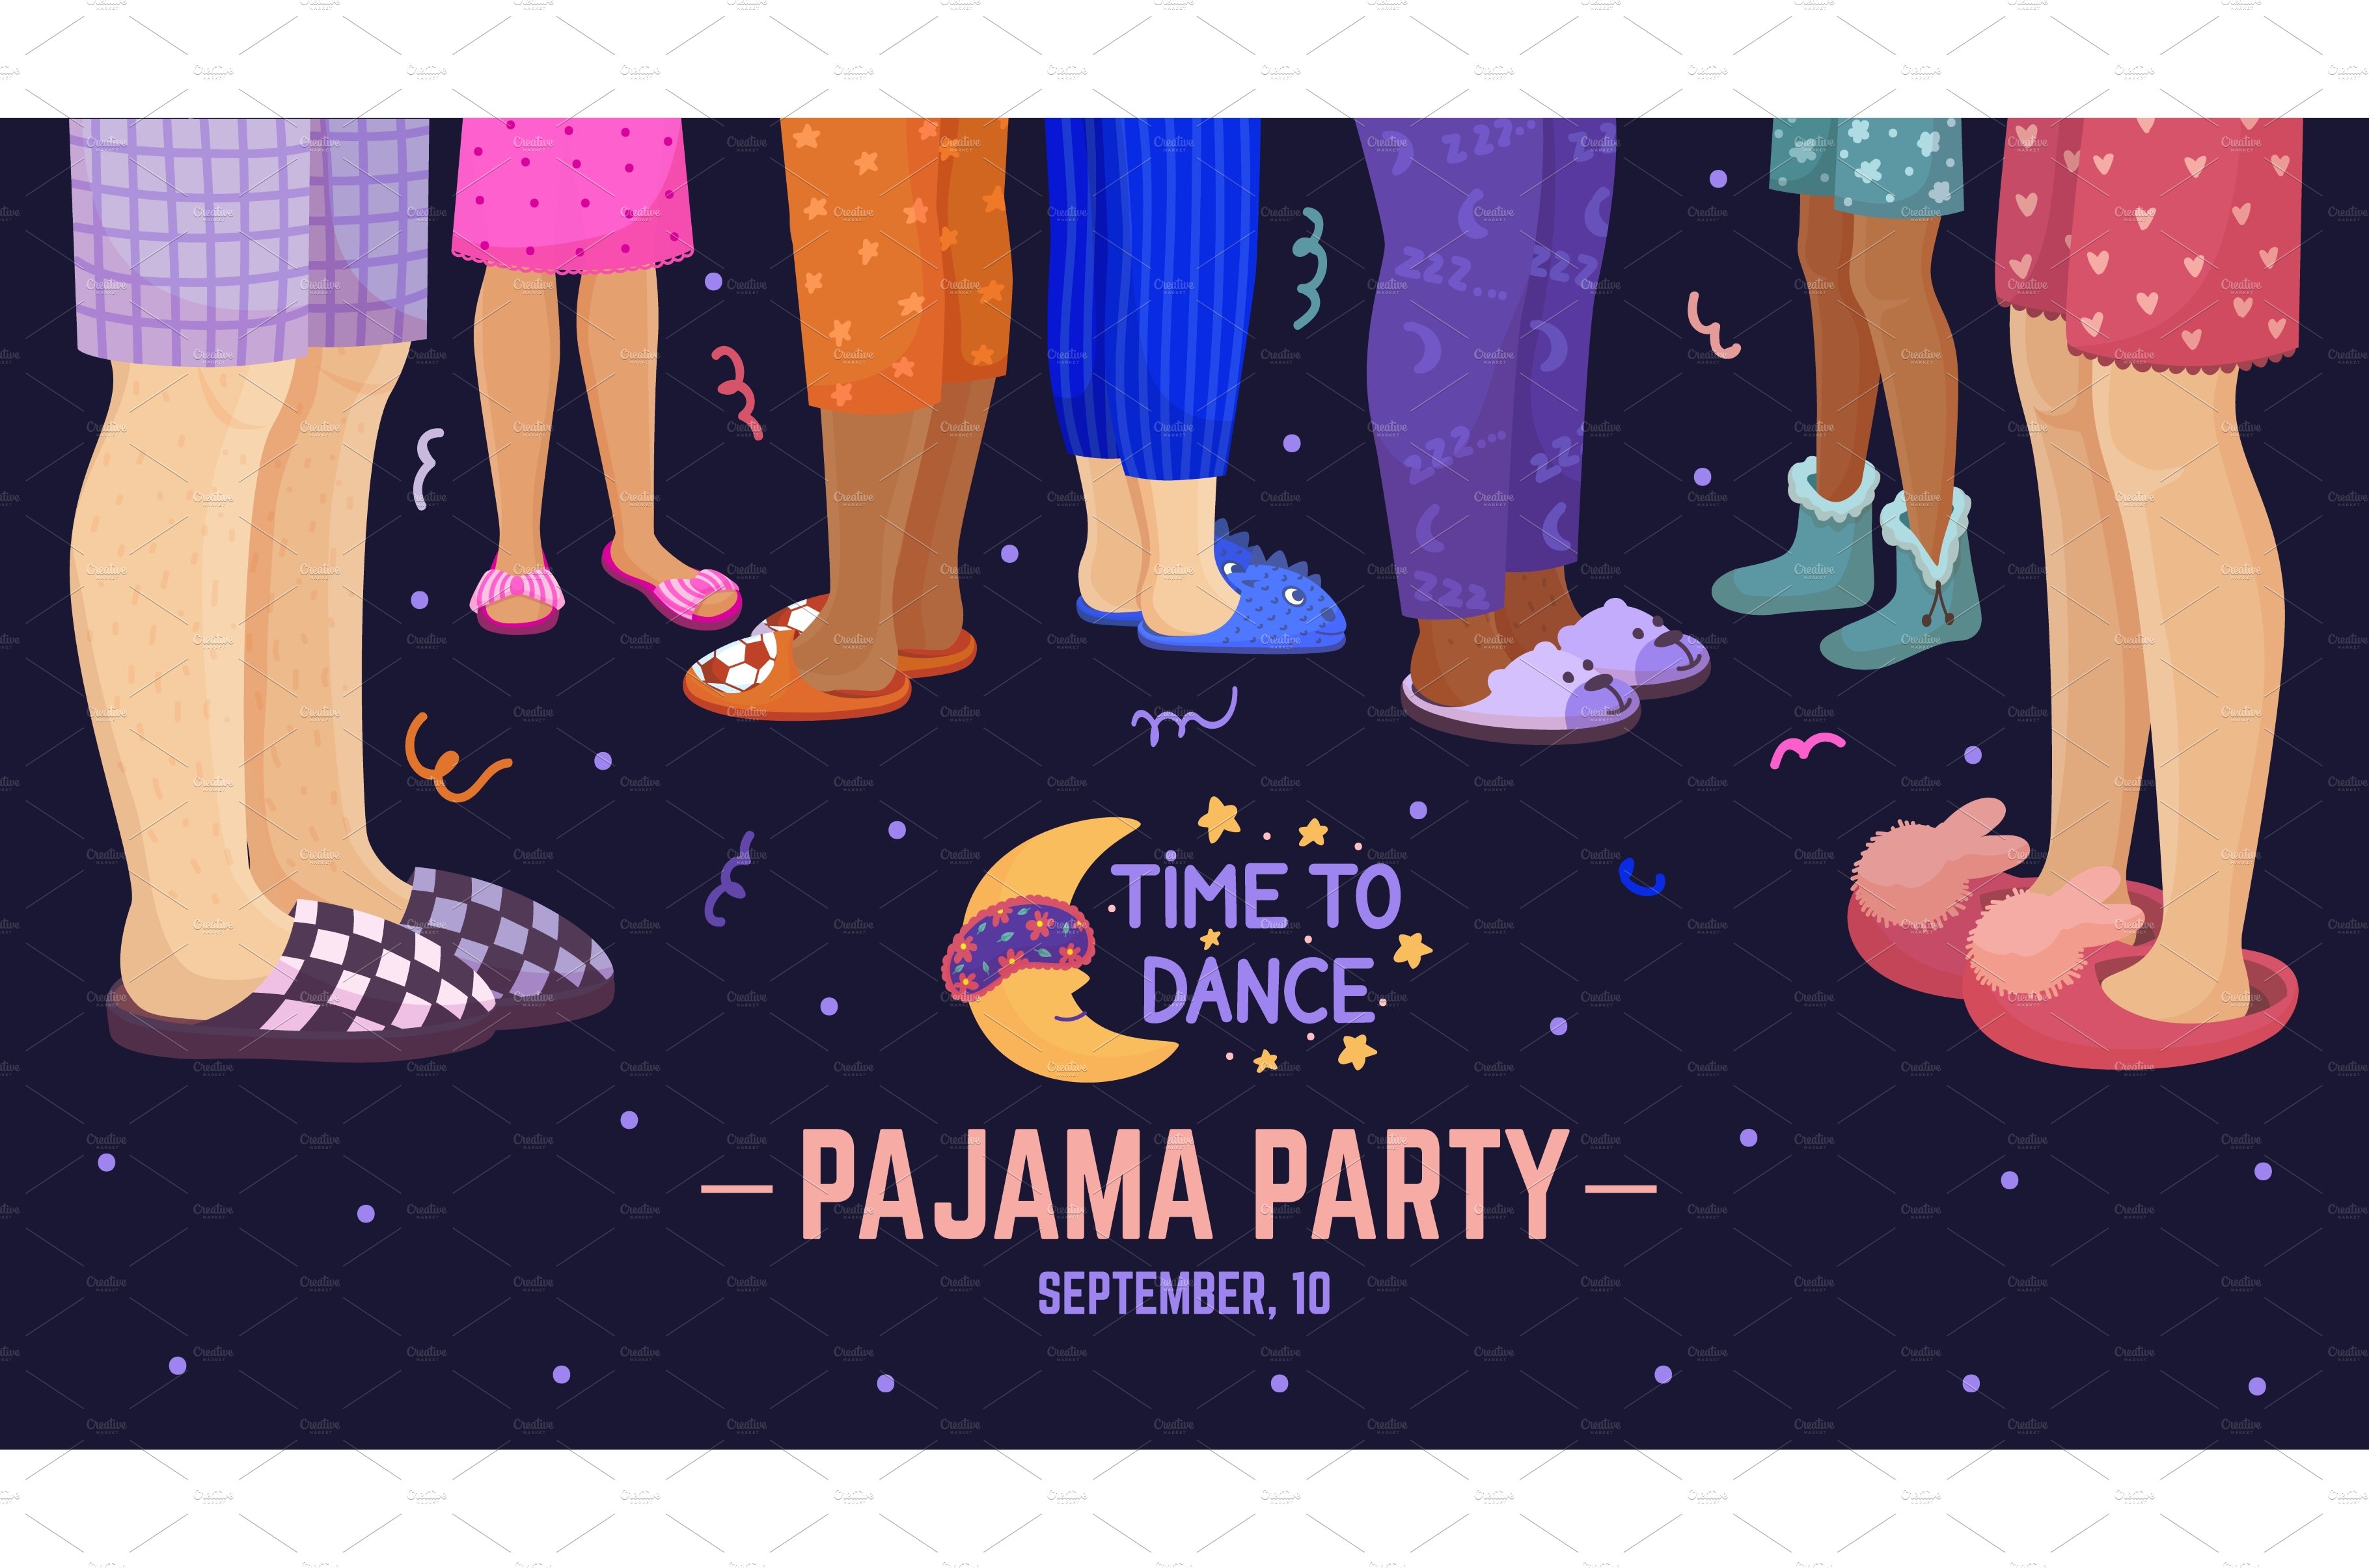 Pajama party background with casual cover image.